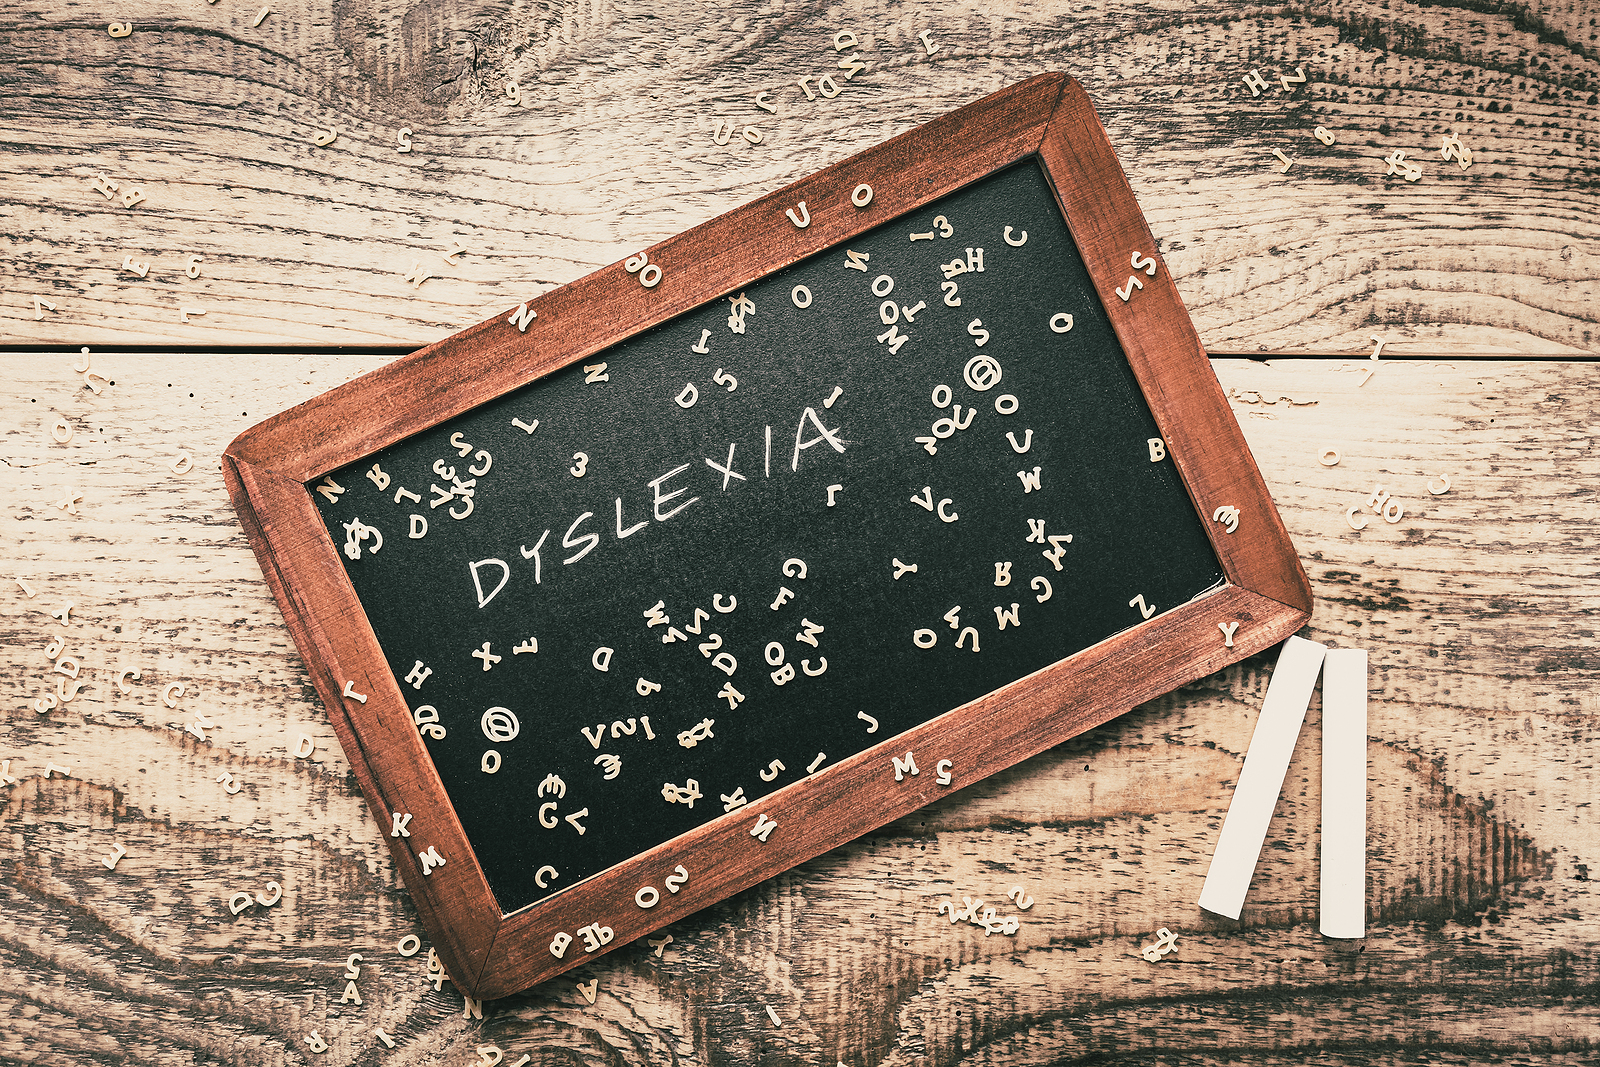 Dyslexia wrote on a chalkboard. Dyslexia testing in Campbell, CA can be your child's support. Learn more about neurodevelopmental screenings in San Francisco, CA.